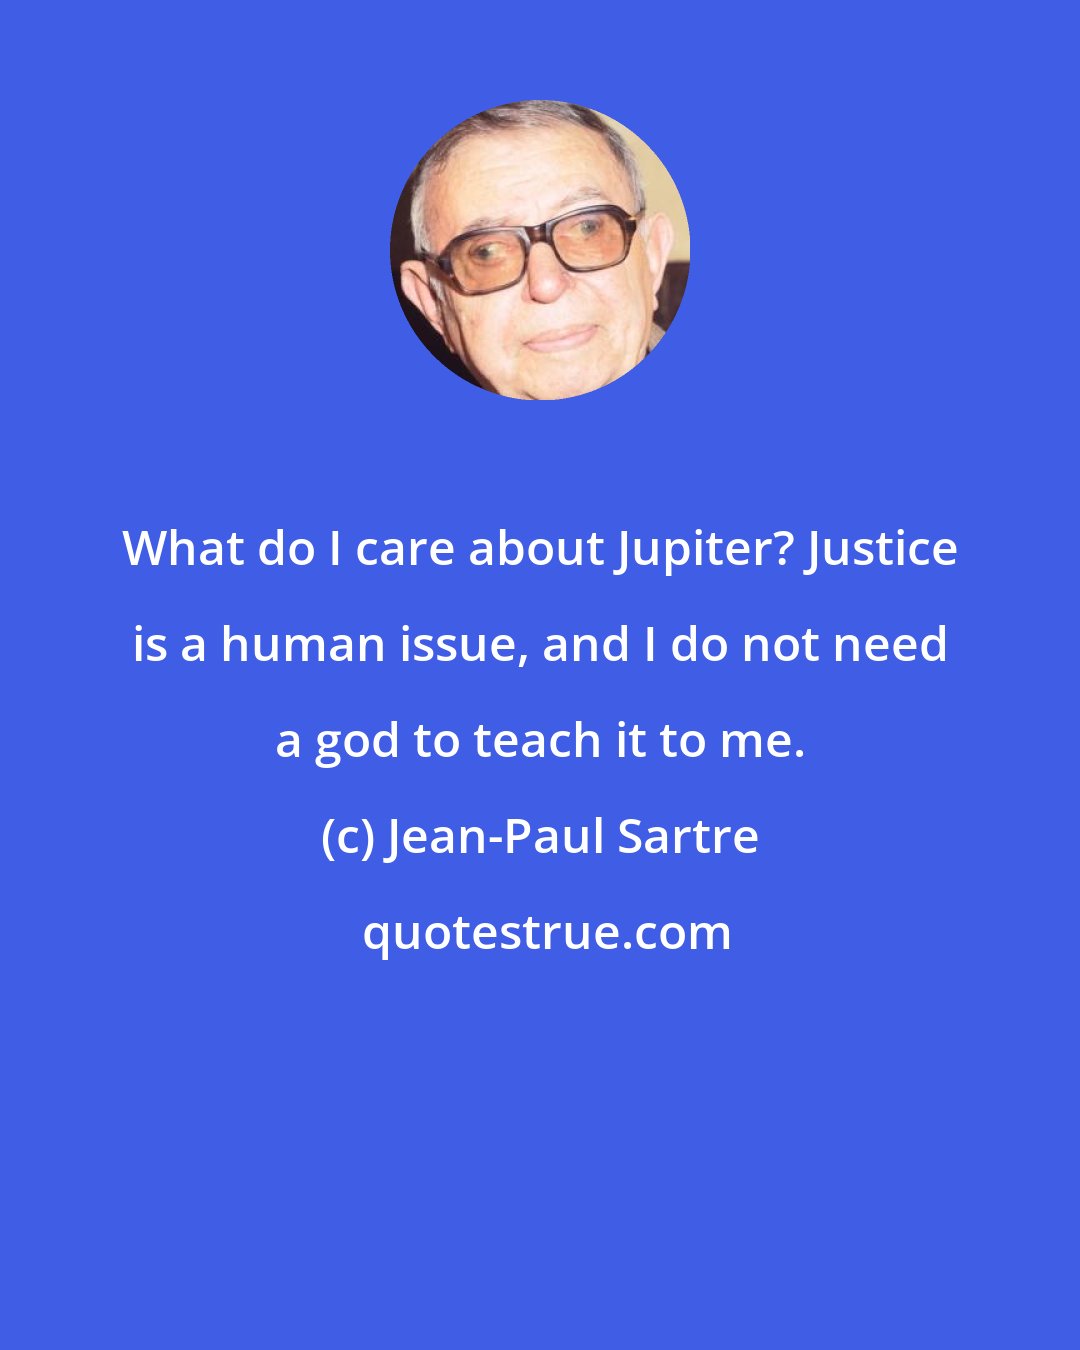 Jean-Paul Sartre: What do I care about Jupiter? Justice is a human issue, and I do not need a god to teach it to me.